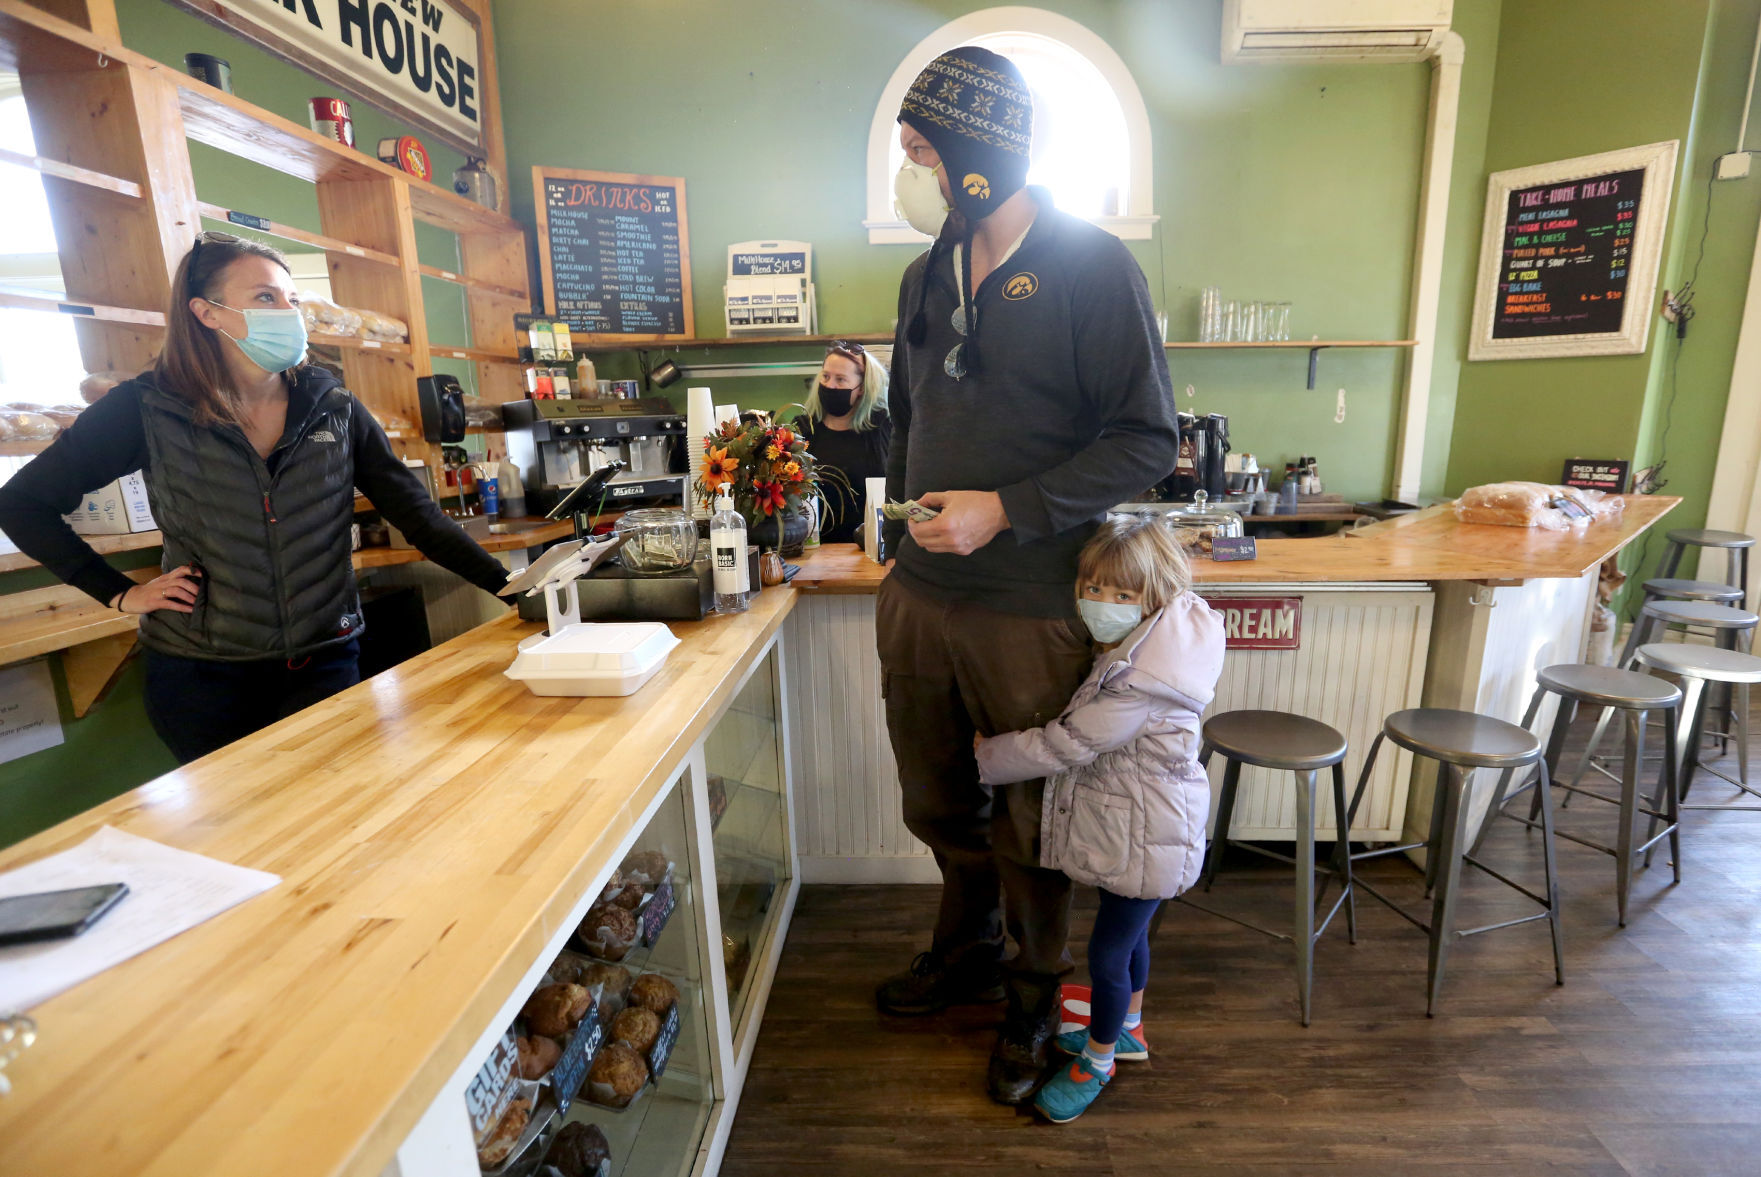 Owner Ali Fuller talks with Bob Heath and his daughter, Grace, 6, both of Dubuque, at Milk House Artisan Eatery, Baked Goods & Catering in Dubuque on Wednesday. PHOTO CREDIT: JESSICA REILLY